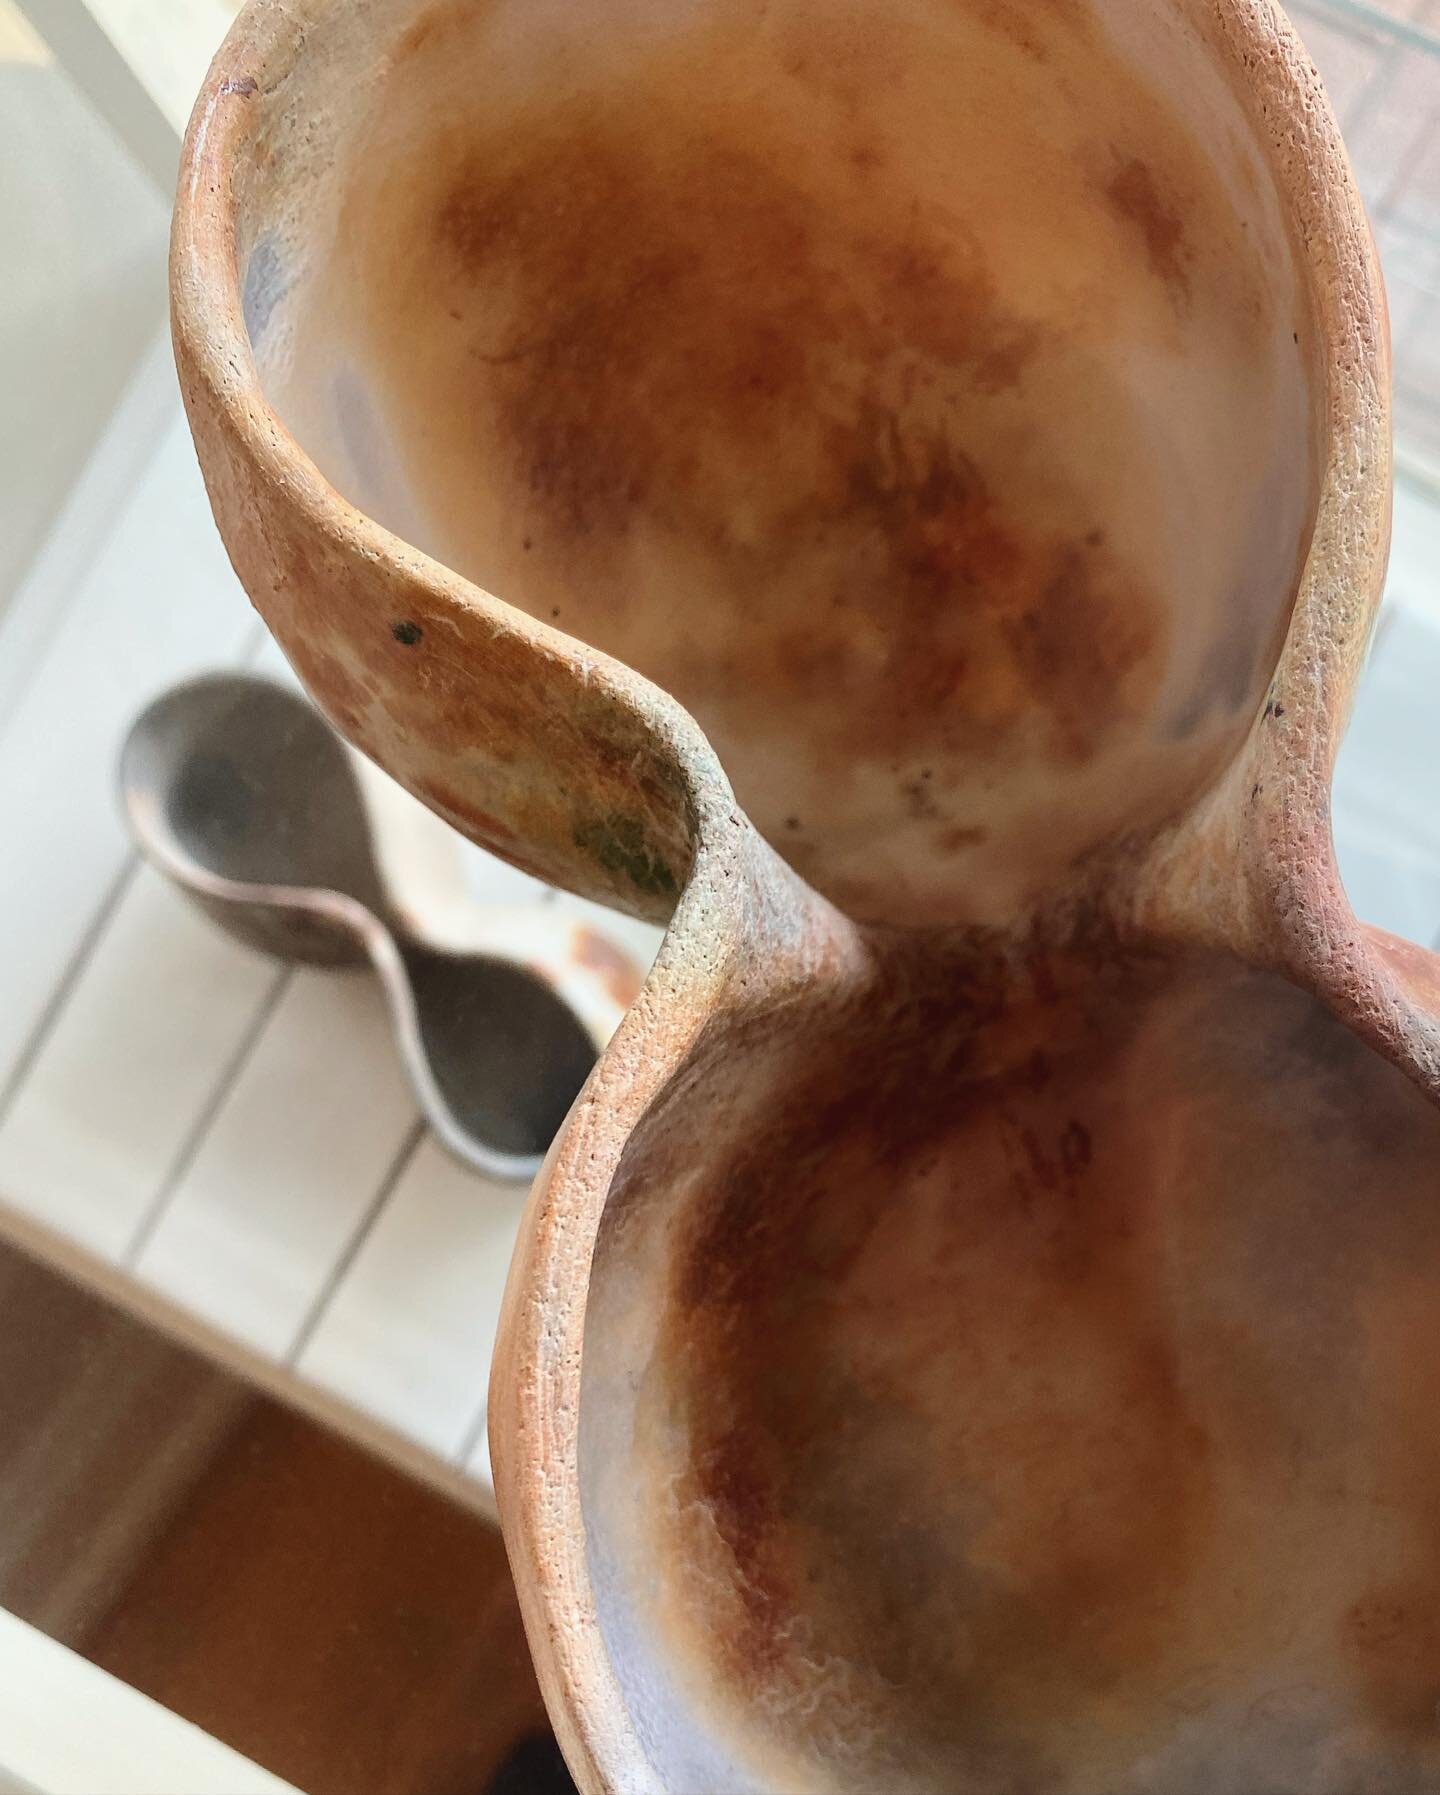 Our gallery space located in the front of our studio offers not only amazing ceramics to purchase but infinite amounts of inspiration for our potters. Check out these amazing smoke fired pieces by Jimmy Clark that just entered the gallery 😍